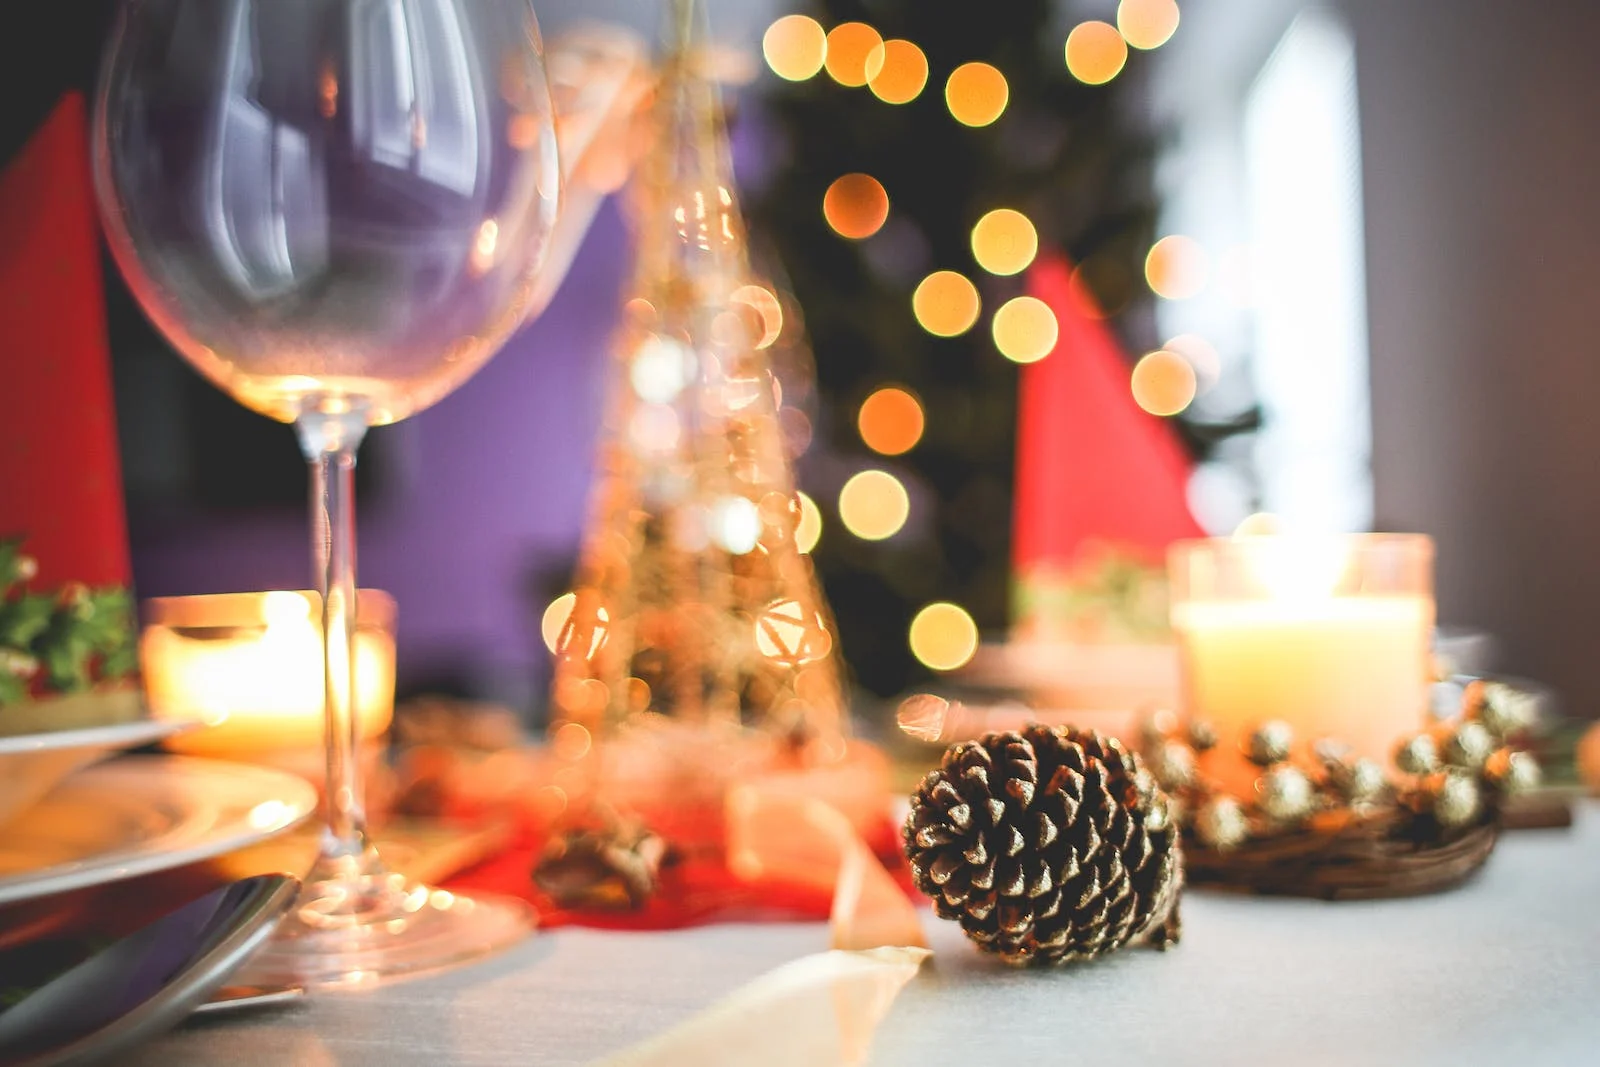 Alcohol and the menopause during the festive season